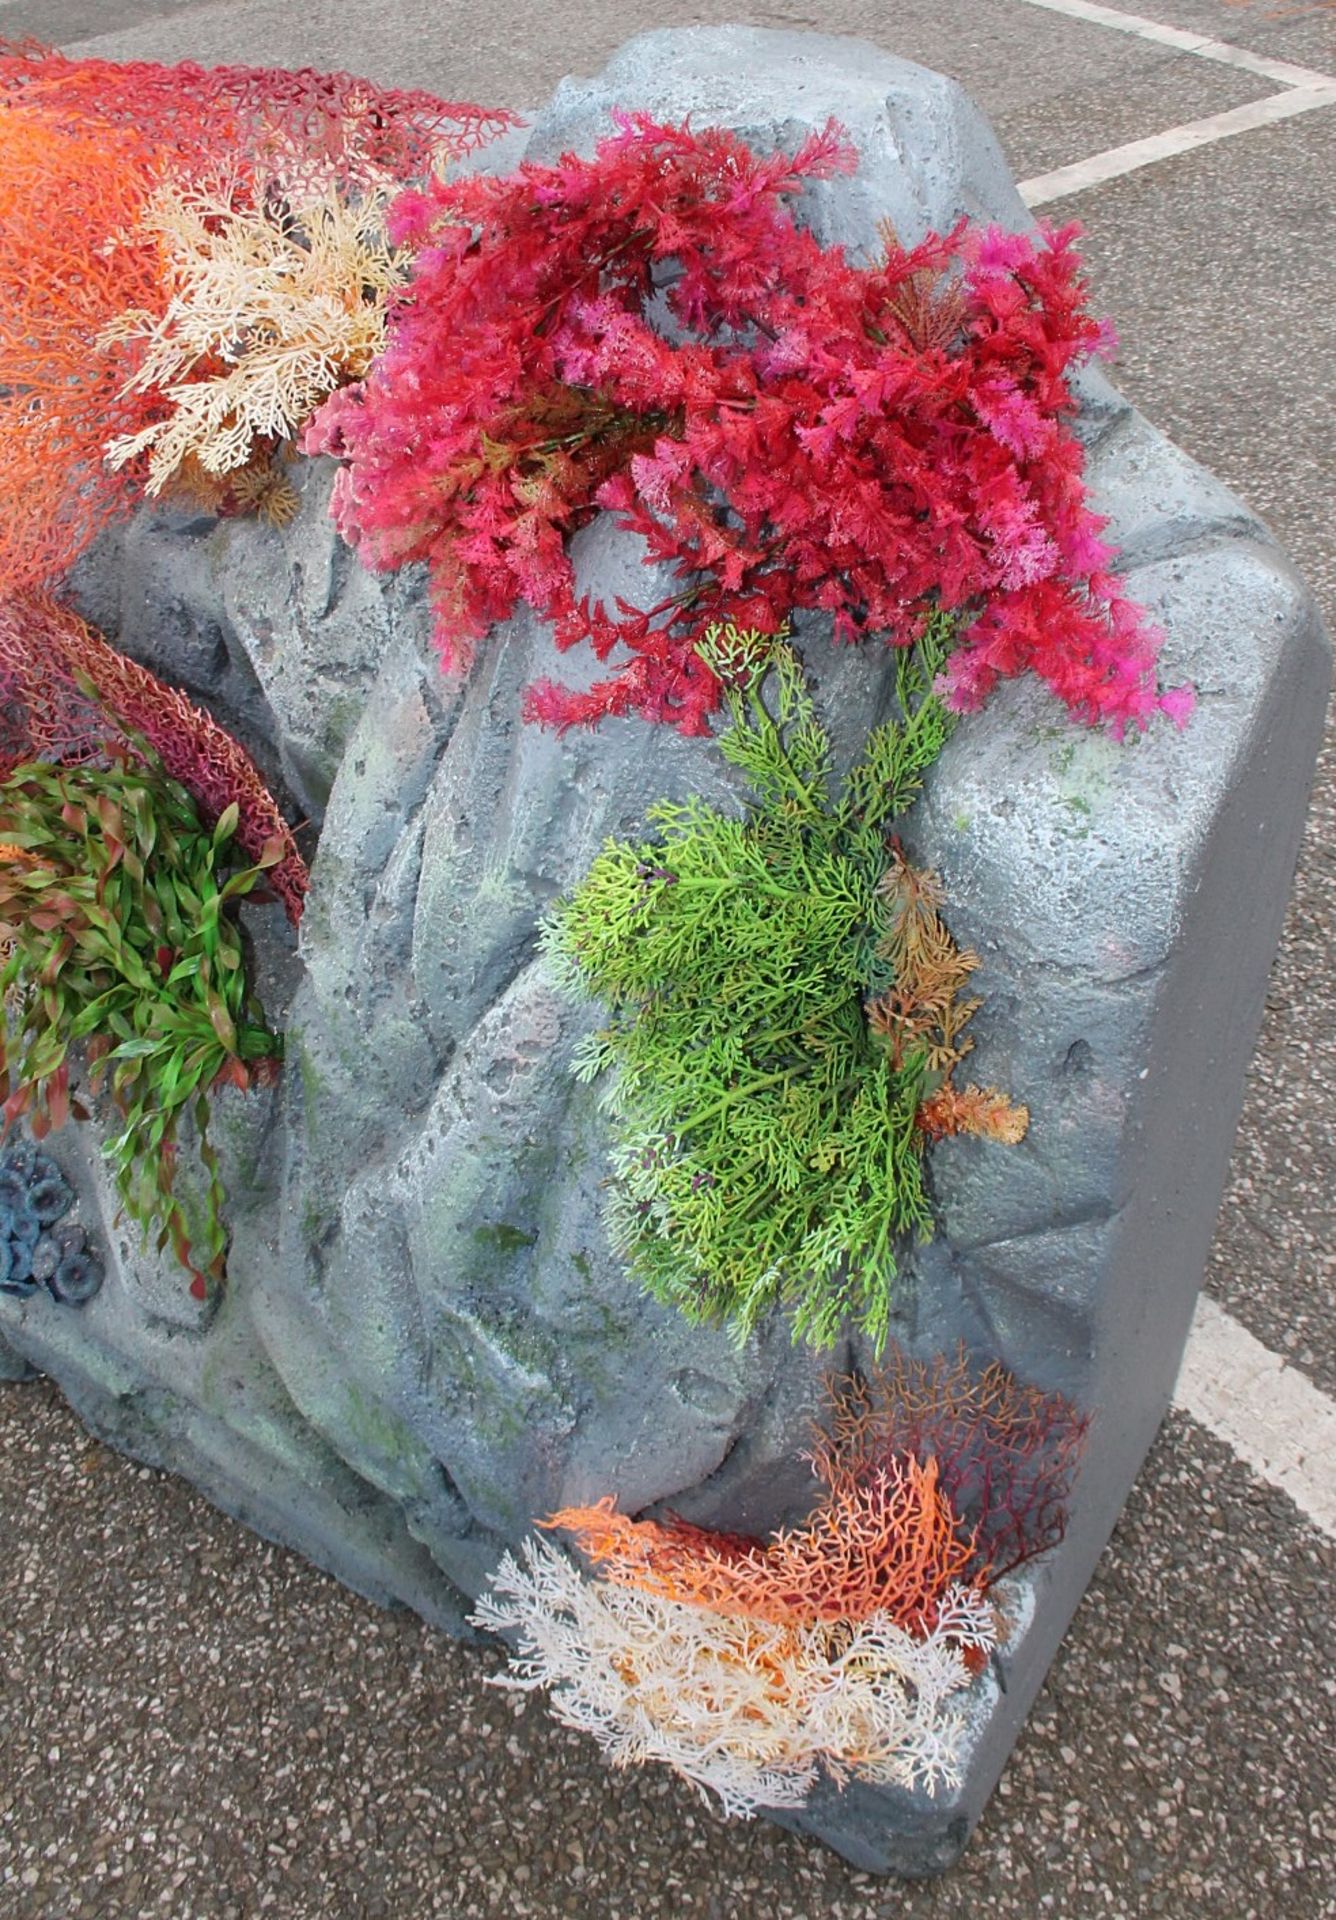 1 x Bespoke Coral Reef Shop Display / Theatre Stage Prop - 2.8 Metres Long - Recently Removed From A - Image 4 of 9